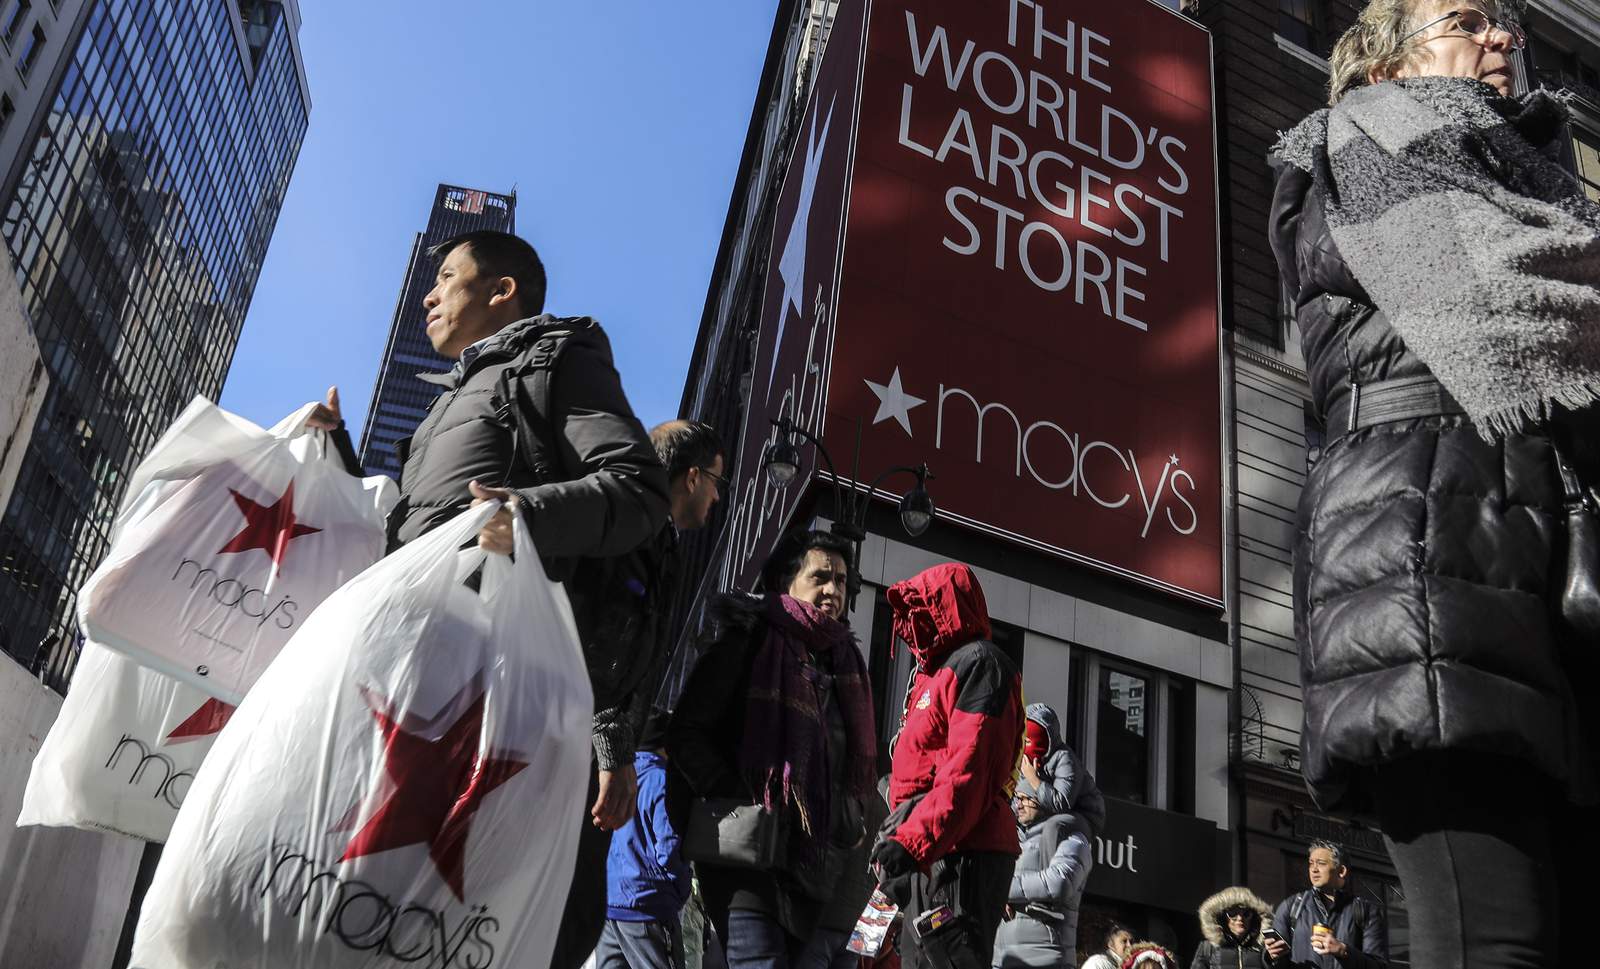 Strong fourth quarter for Macy's heading to transition year